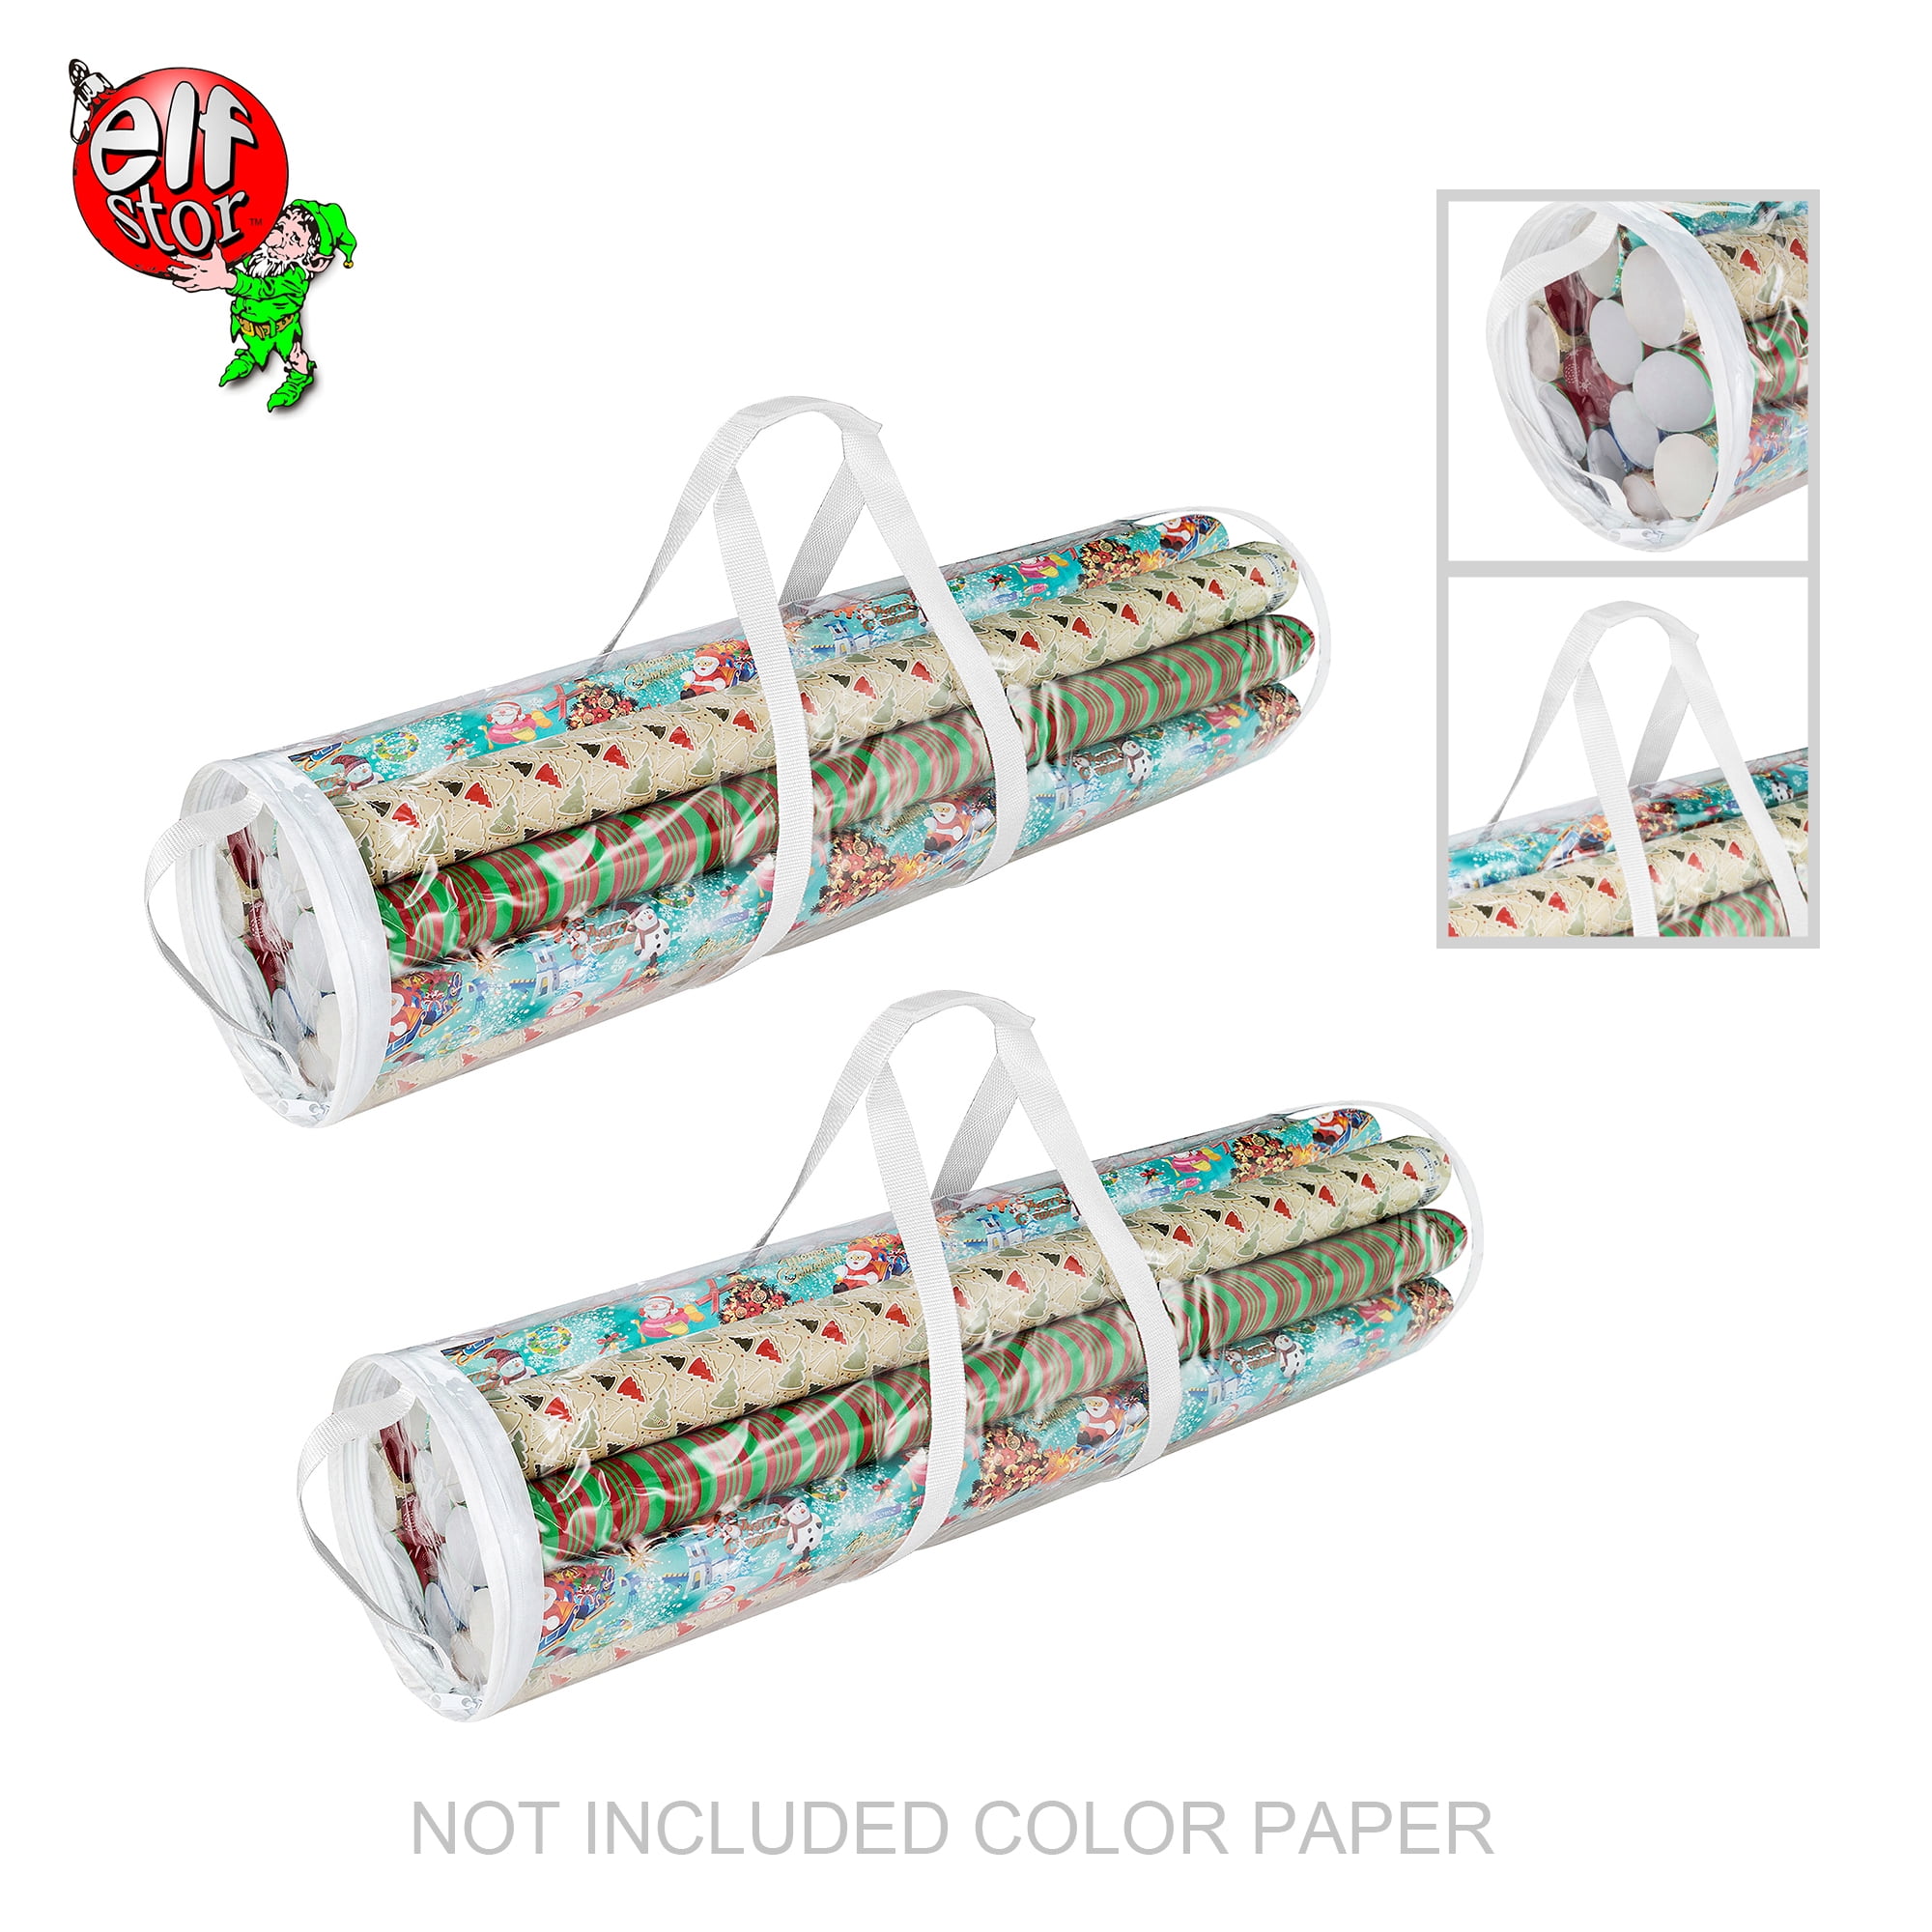 Elf Stor Ultimate Gift Bag and Wrap Storage Organizer HWD630073